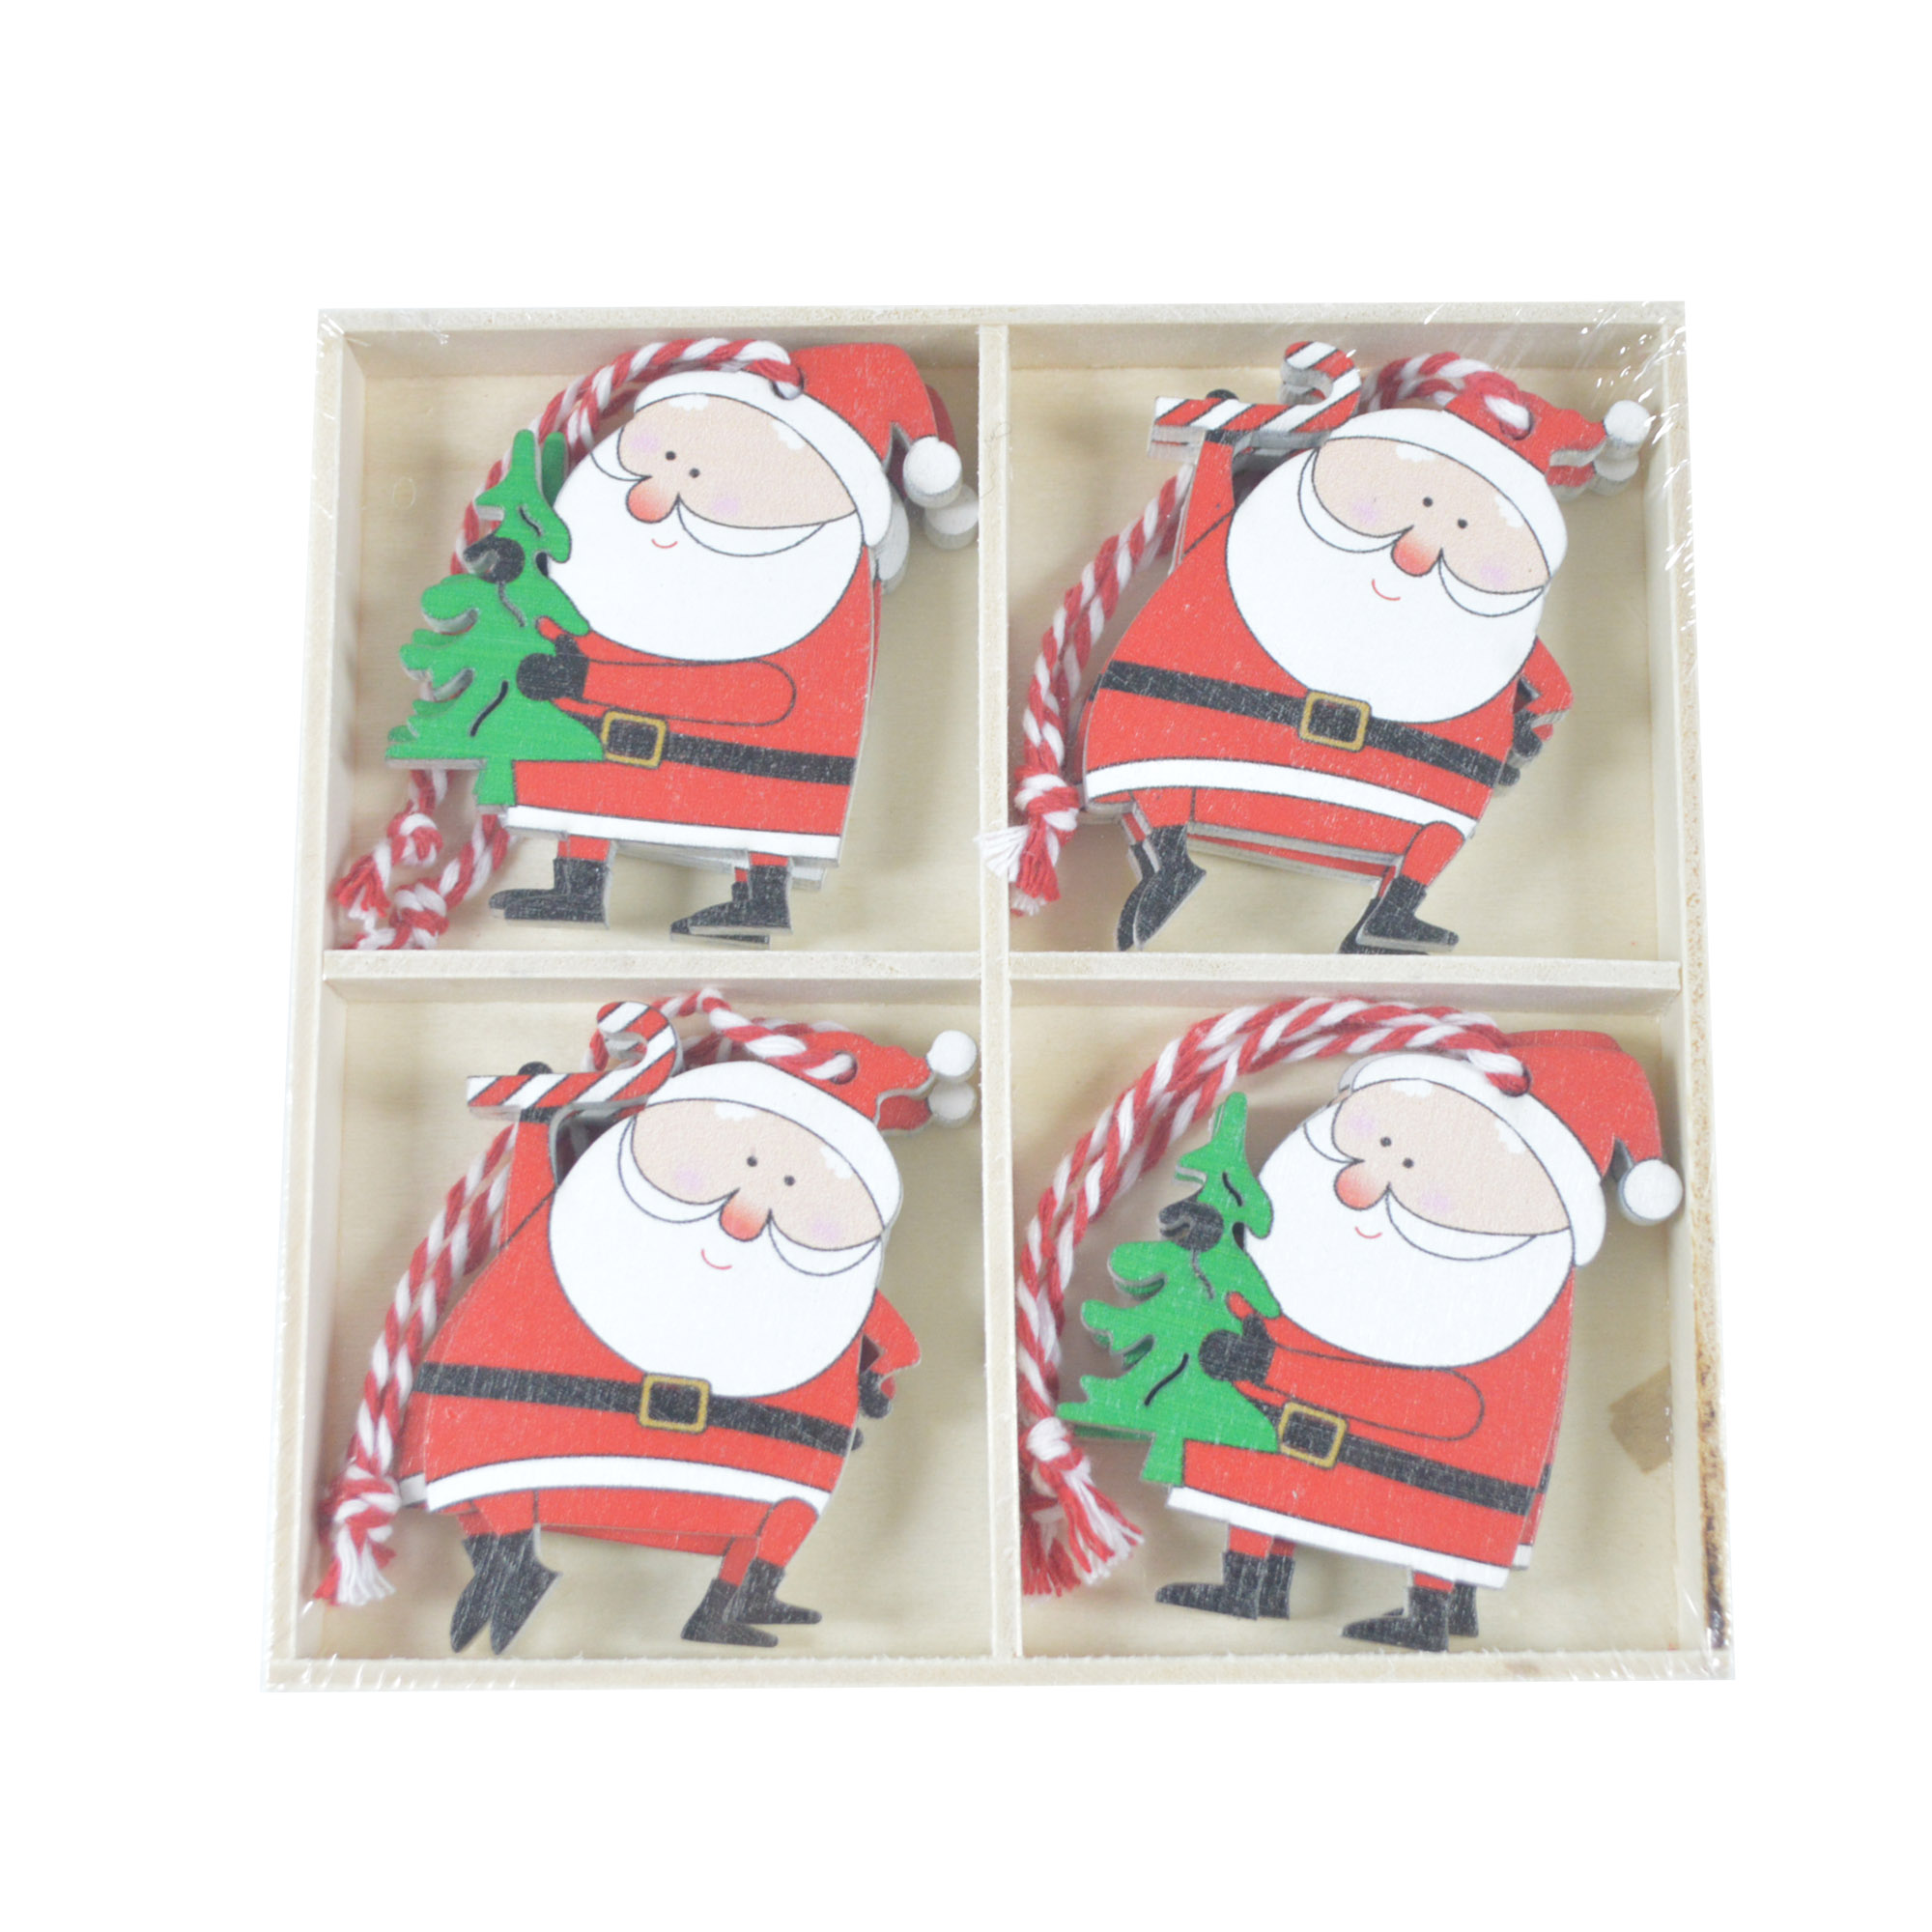 Holiday supplies wooden Hanging ornaments cute Santa claus ornaments Christmas Hanging decor for home